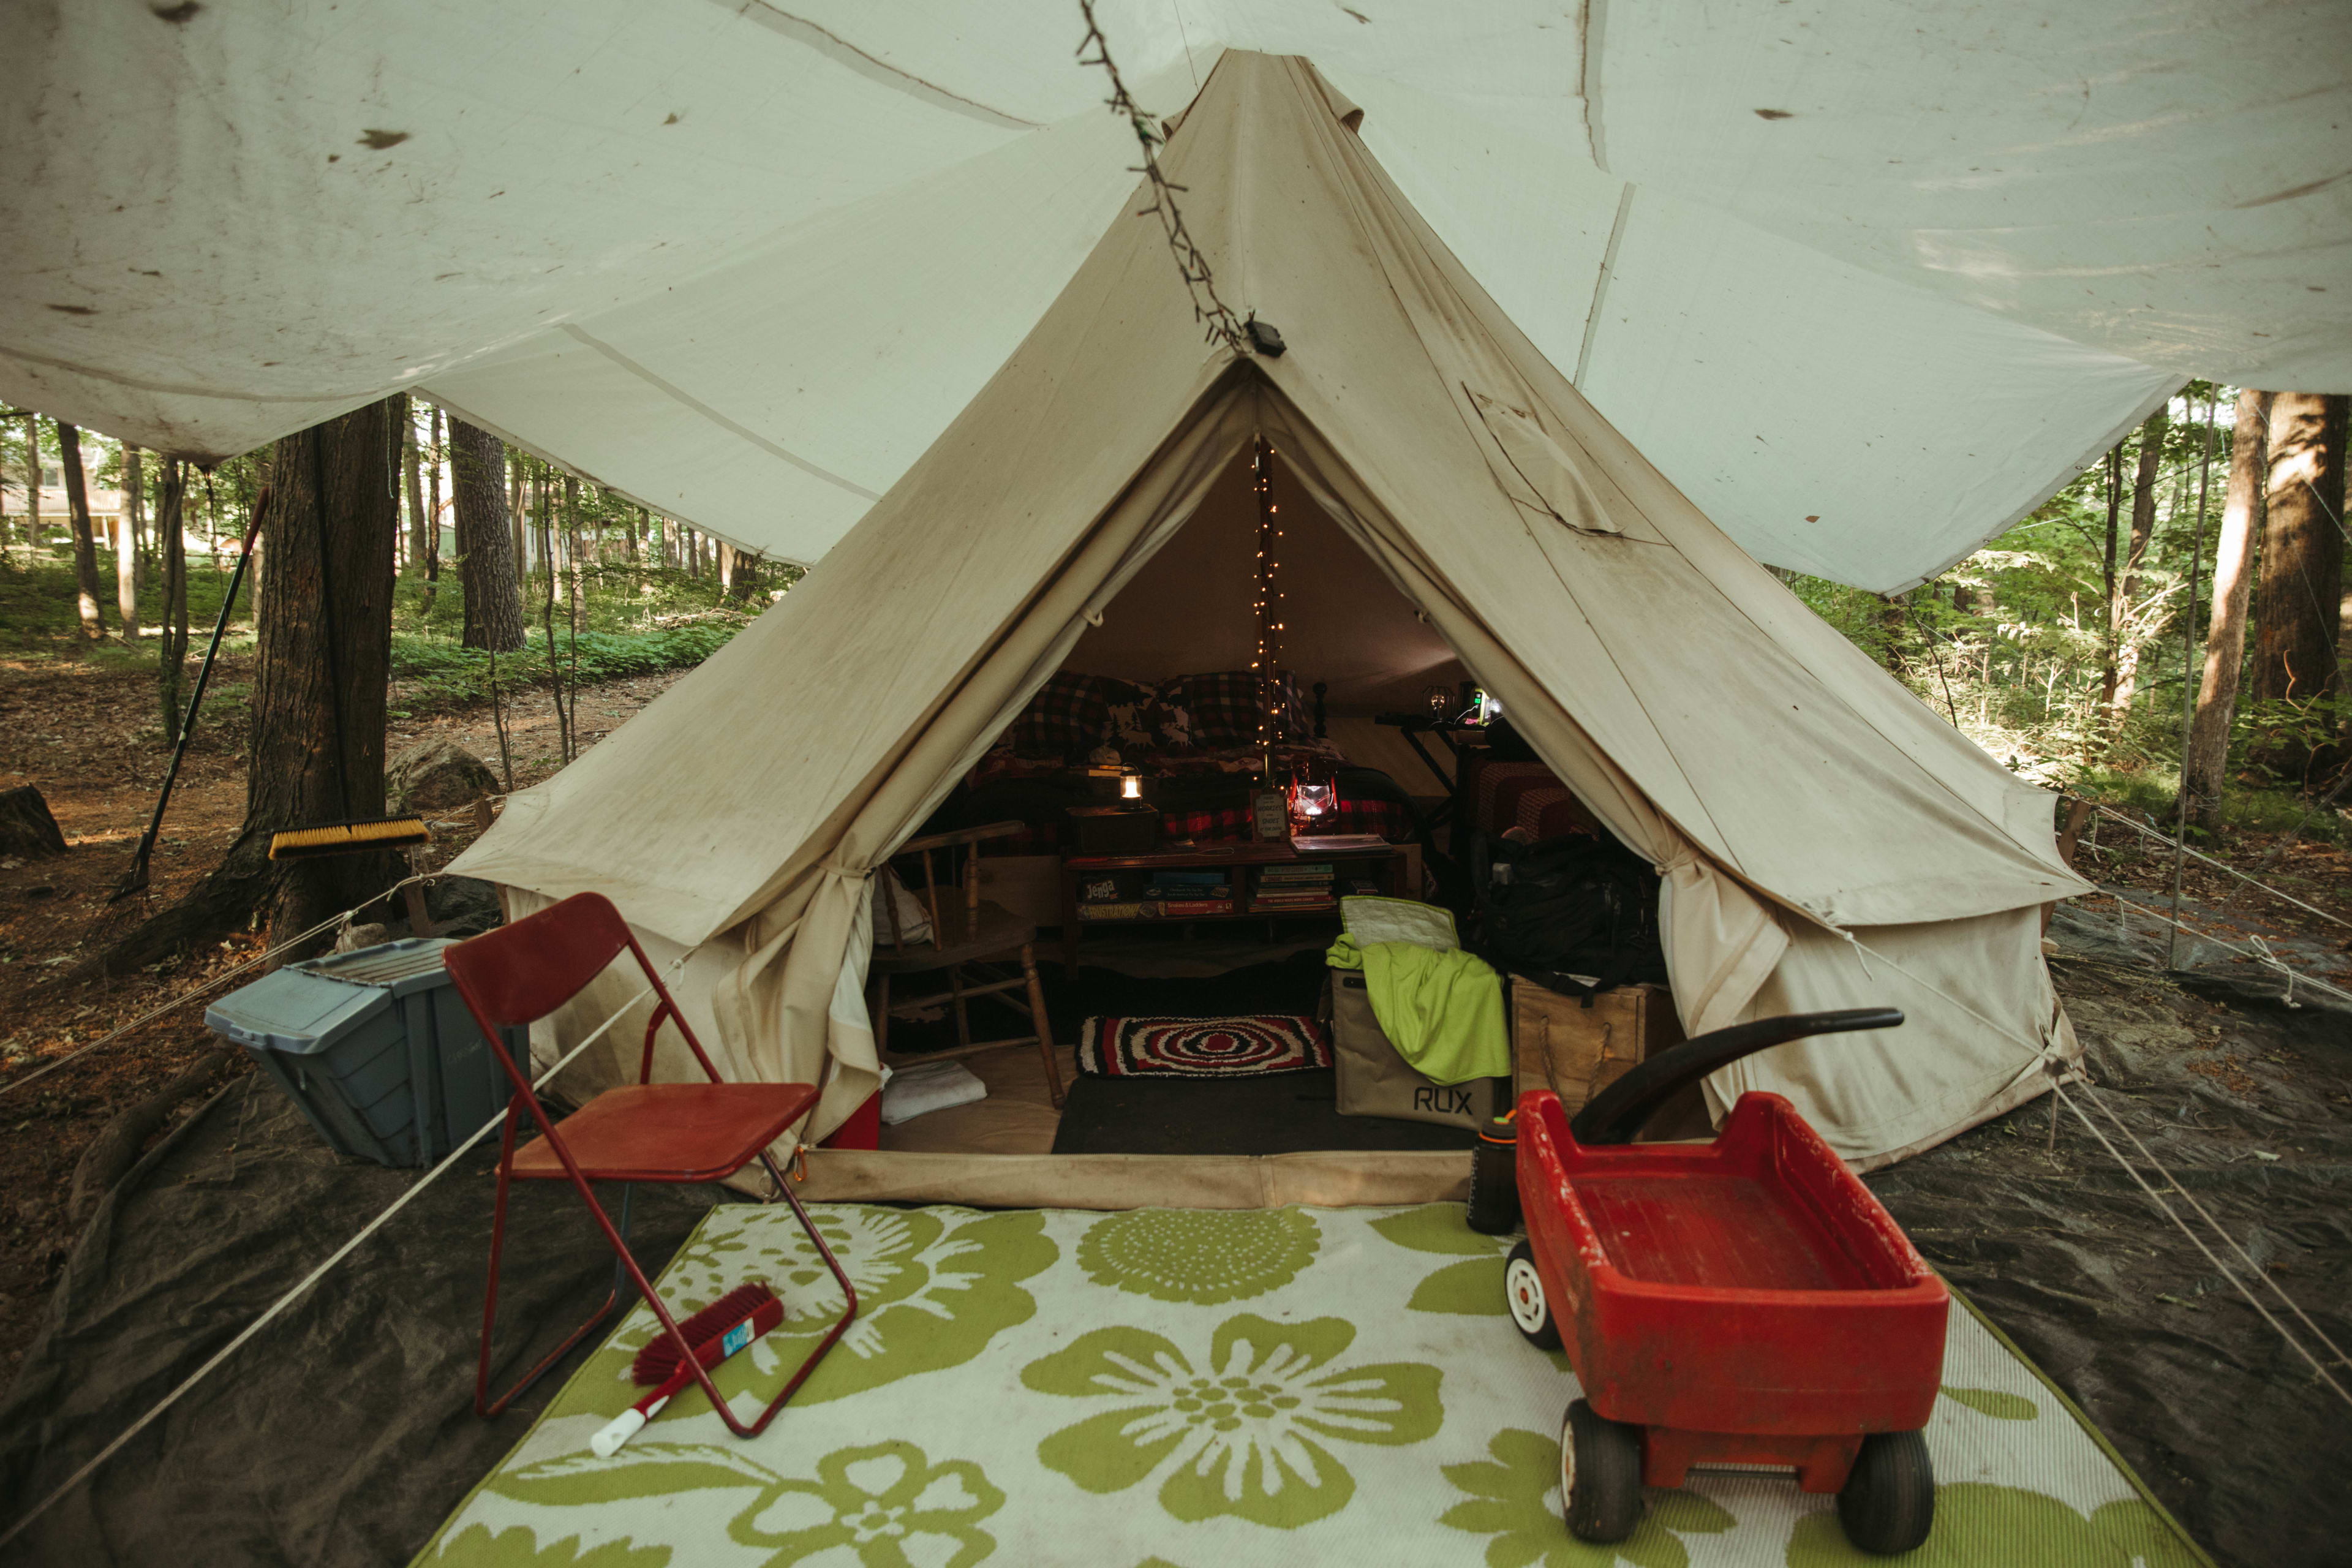 Outside the tent, the cozy cave awaits.